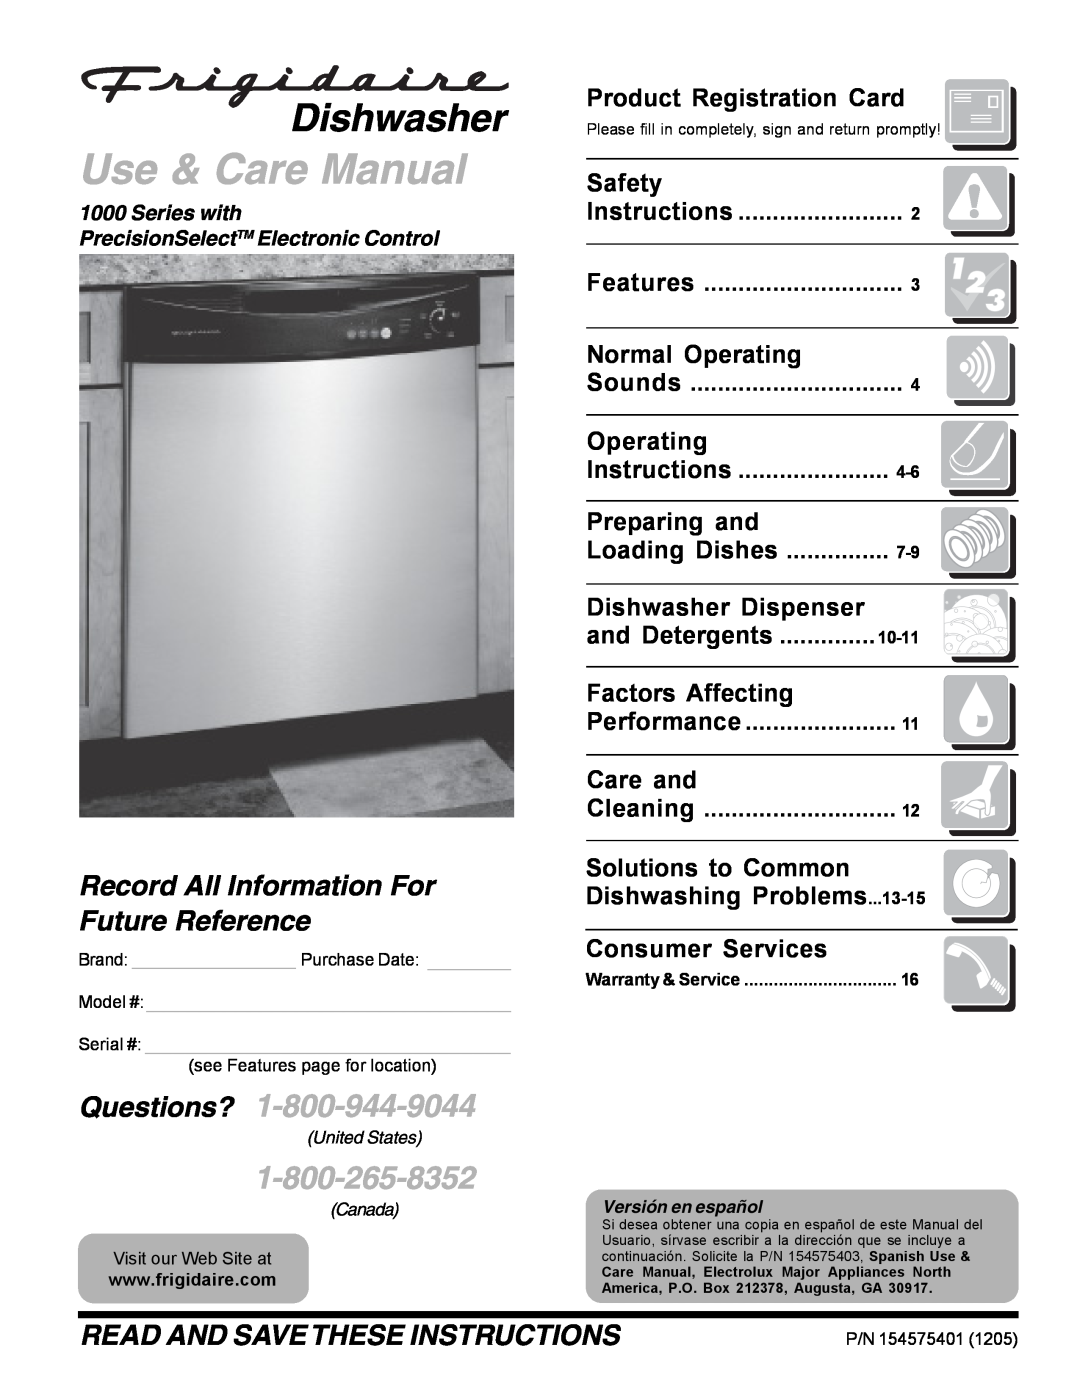 Frigidaire 1000 warranty Product Registration Card, Safety, Normal Operating, Preparing and, Dishwasher Dispenser 